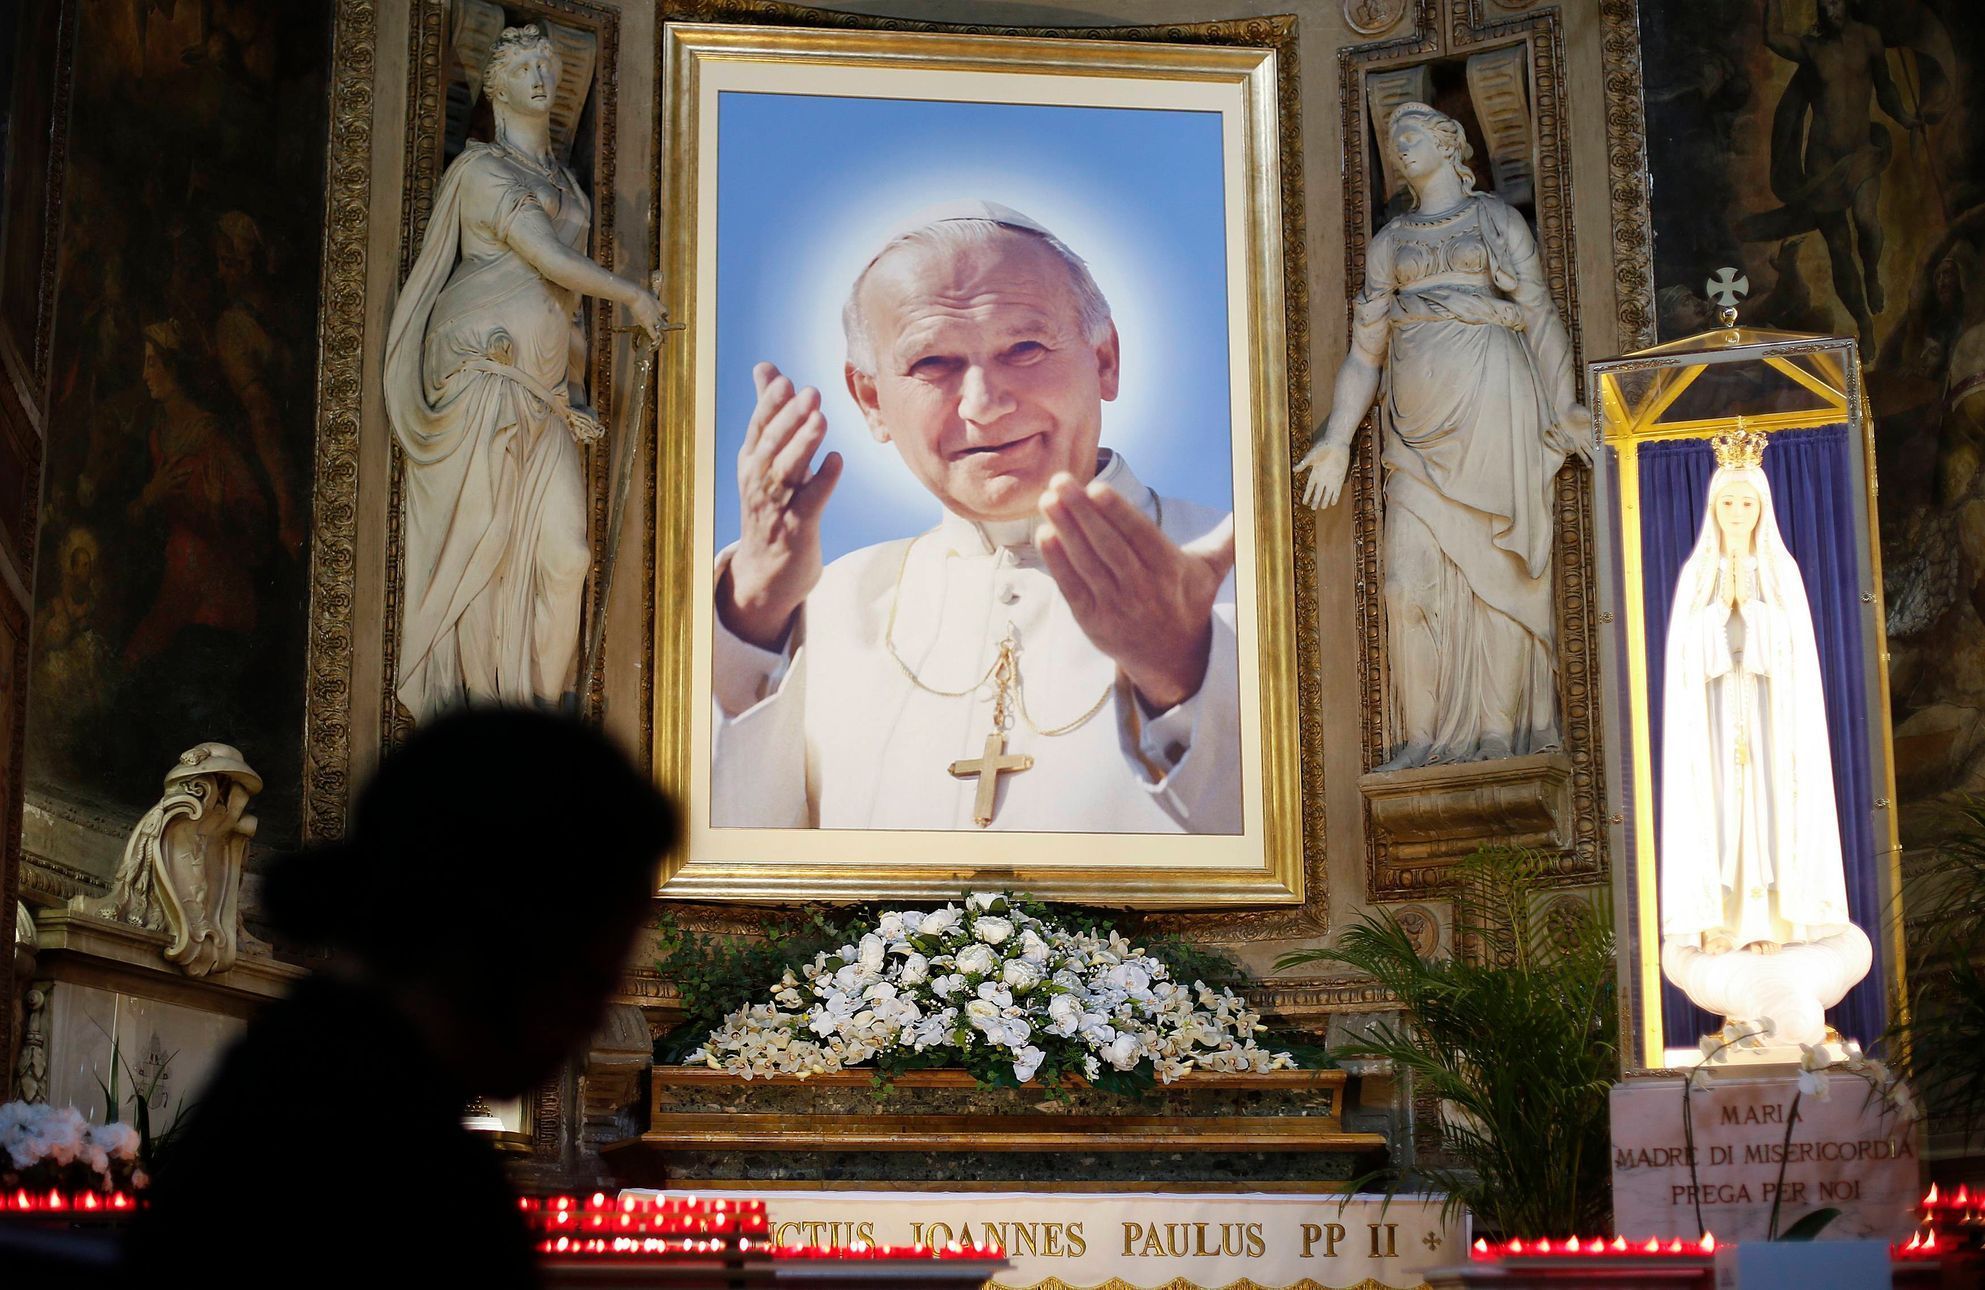 A woman prays in front of a painting depicting Pope John Paul II in a church in downtown Rome